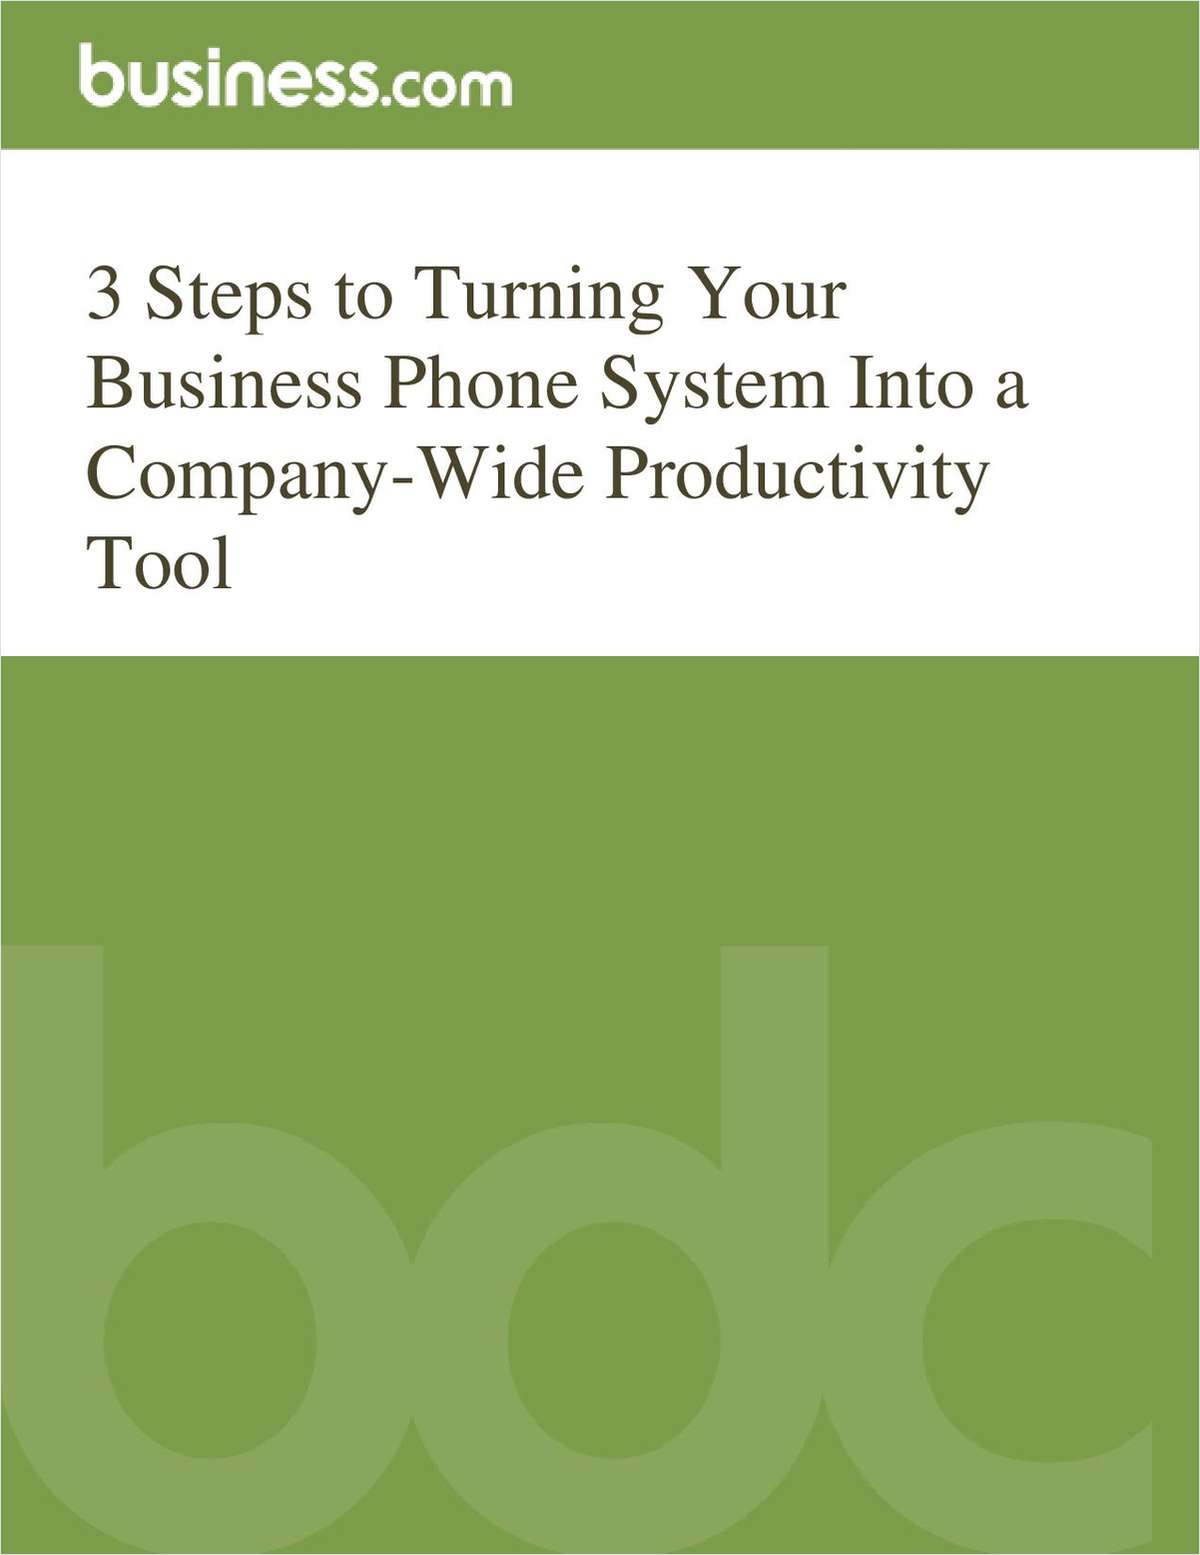 3 Steps to Turning Your Business Phone System Into a Company-Wide Productivity Tool